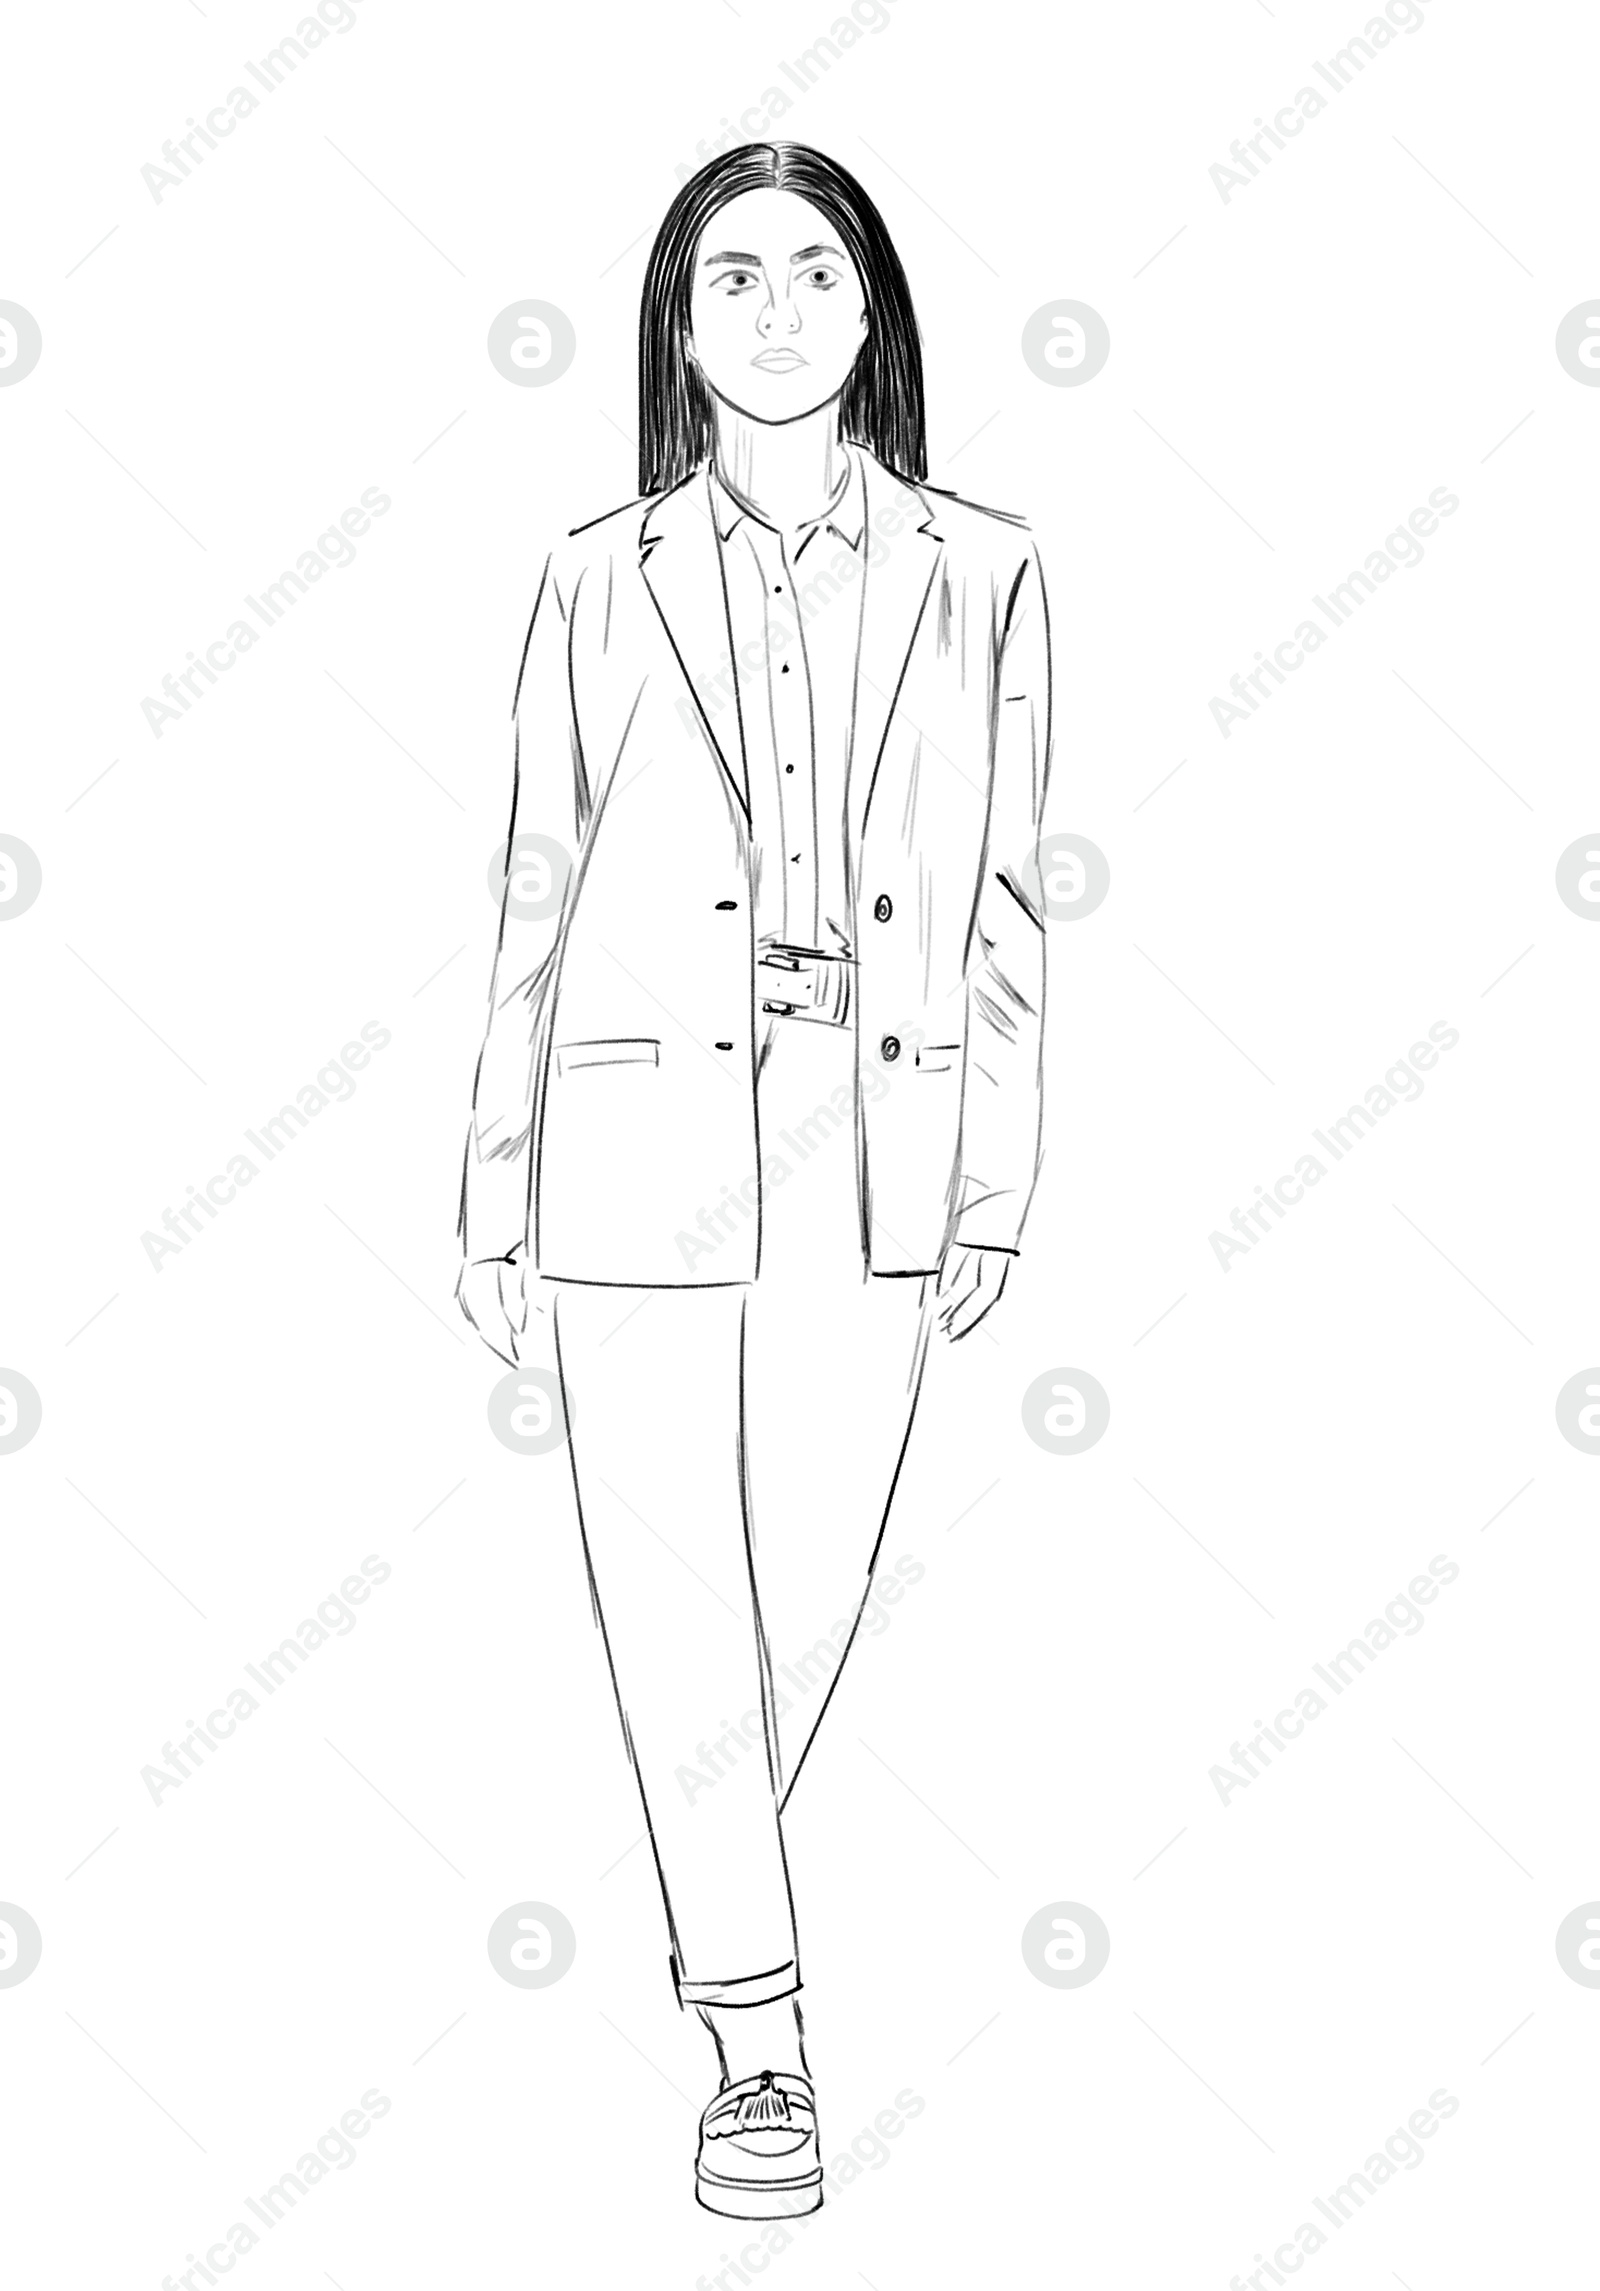 Image of Fashion designer. Sketch of woman in stylish clothes on white background